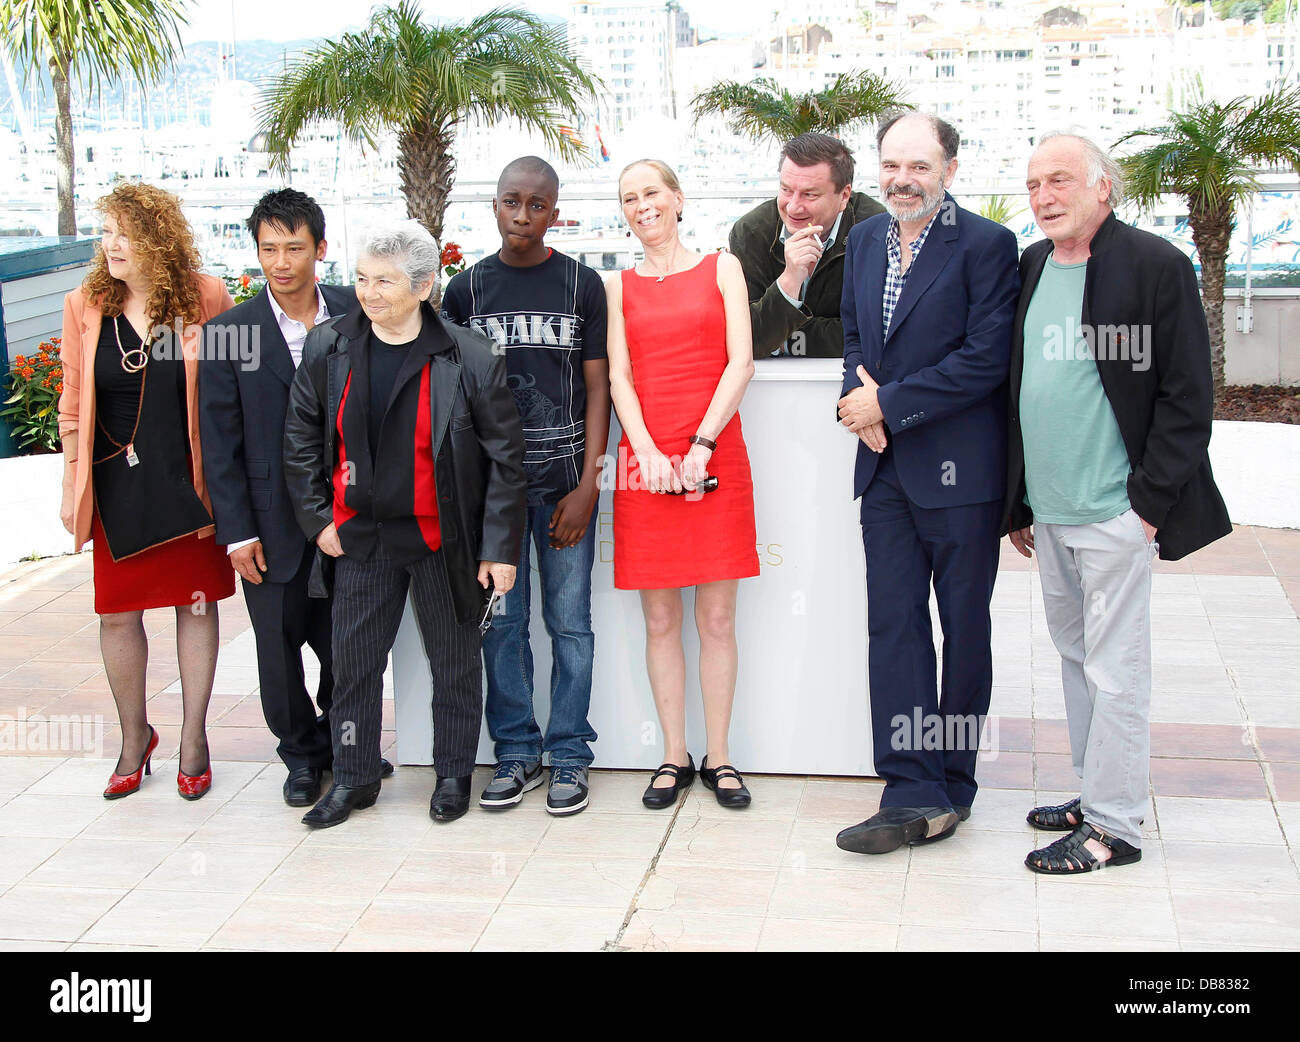 Evelyne Didi, Quoc Dung-Nguyen, Little Bob, guest, Kati Outinen, Director Aki Kaurismaki, Jean-Pierre Darroussin and Blondin Miguel 2011 Cannes International Film Festival - Day 7 - Le Havre - Photocall  Cannes, France - 17.05.11 Stock Photo